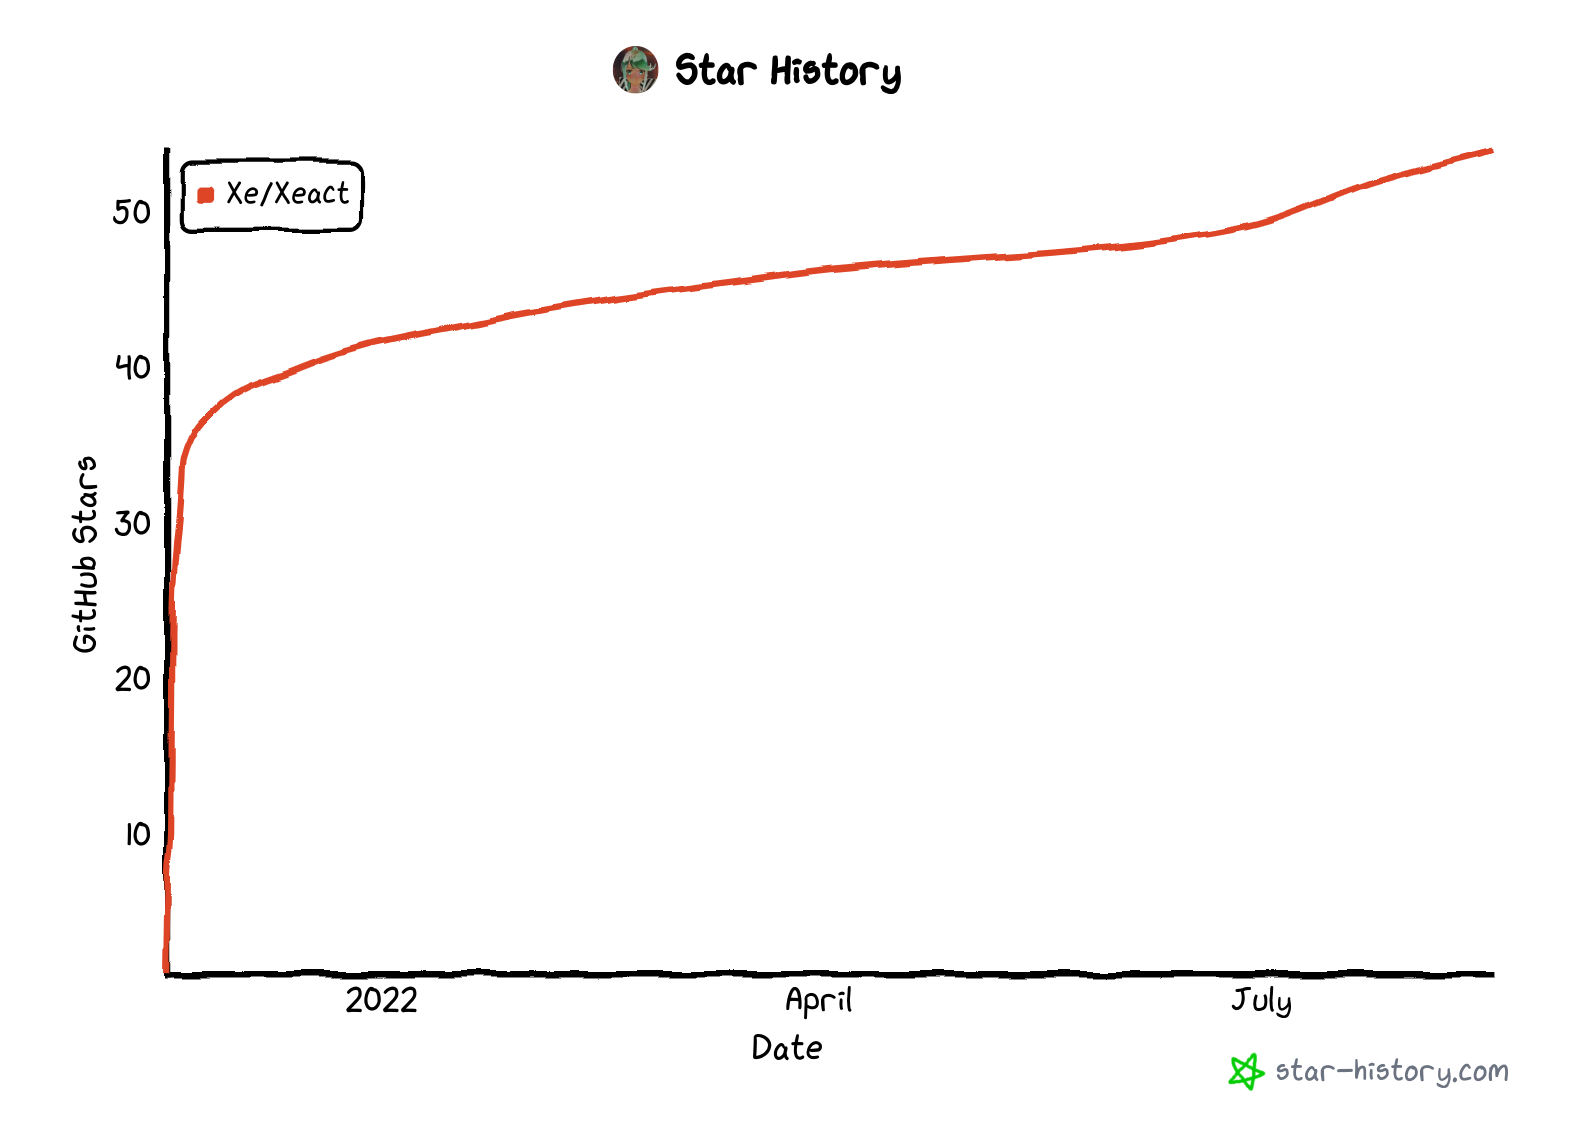 A graph of Xeact's star count going up and to the right